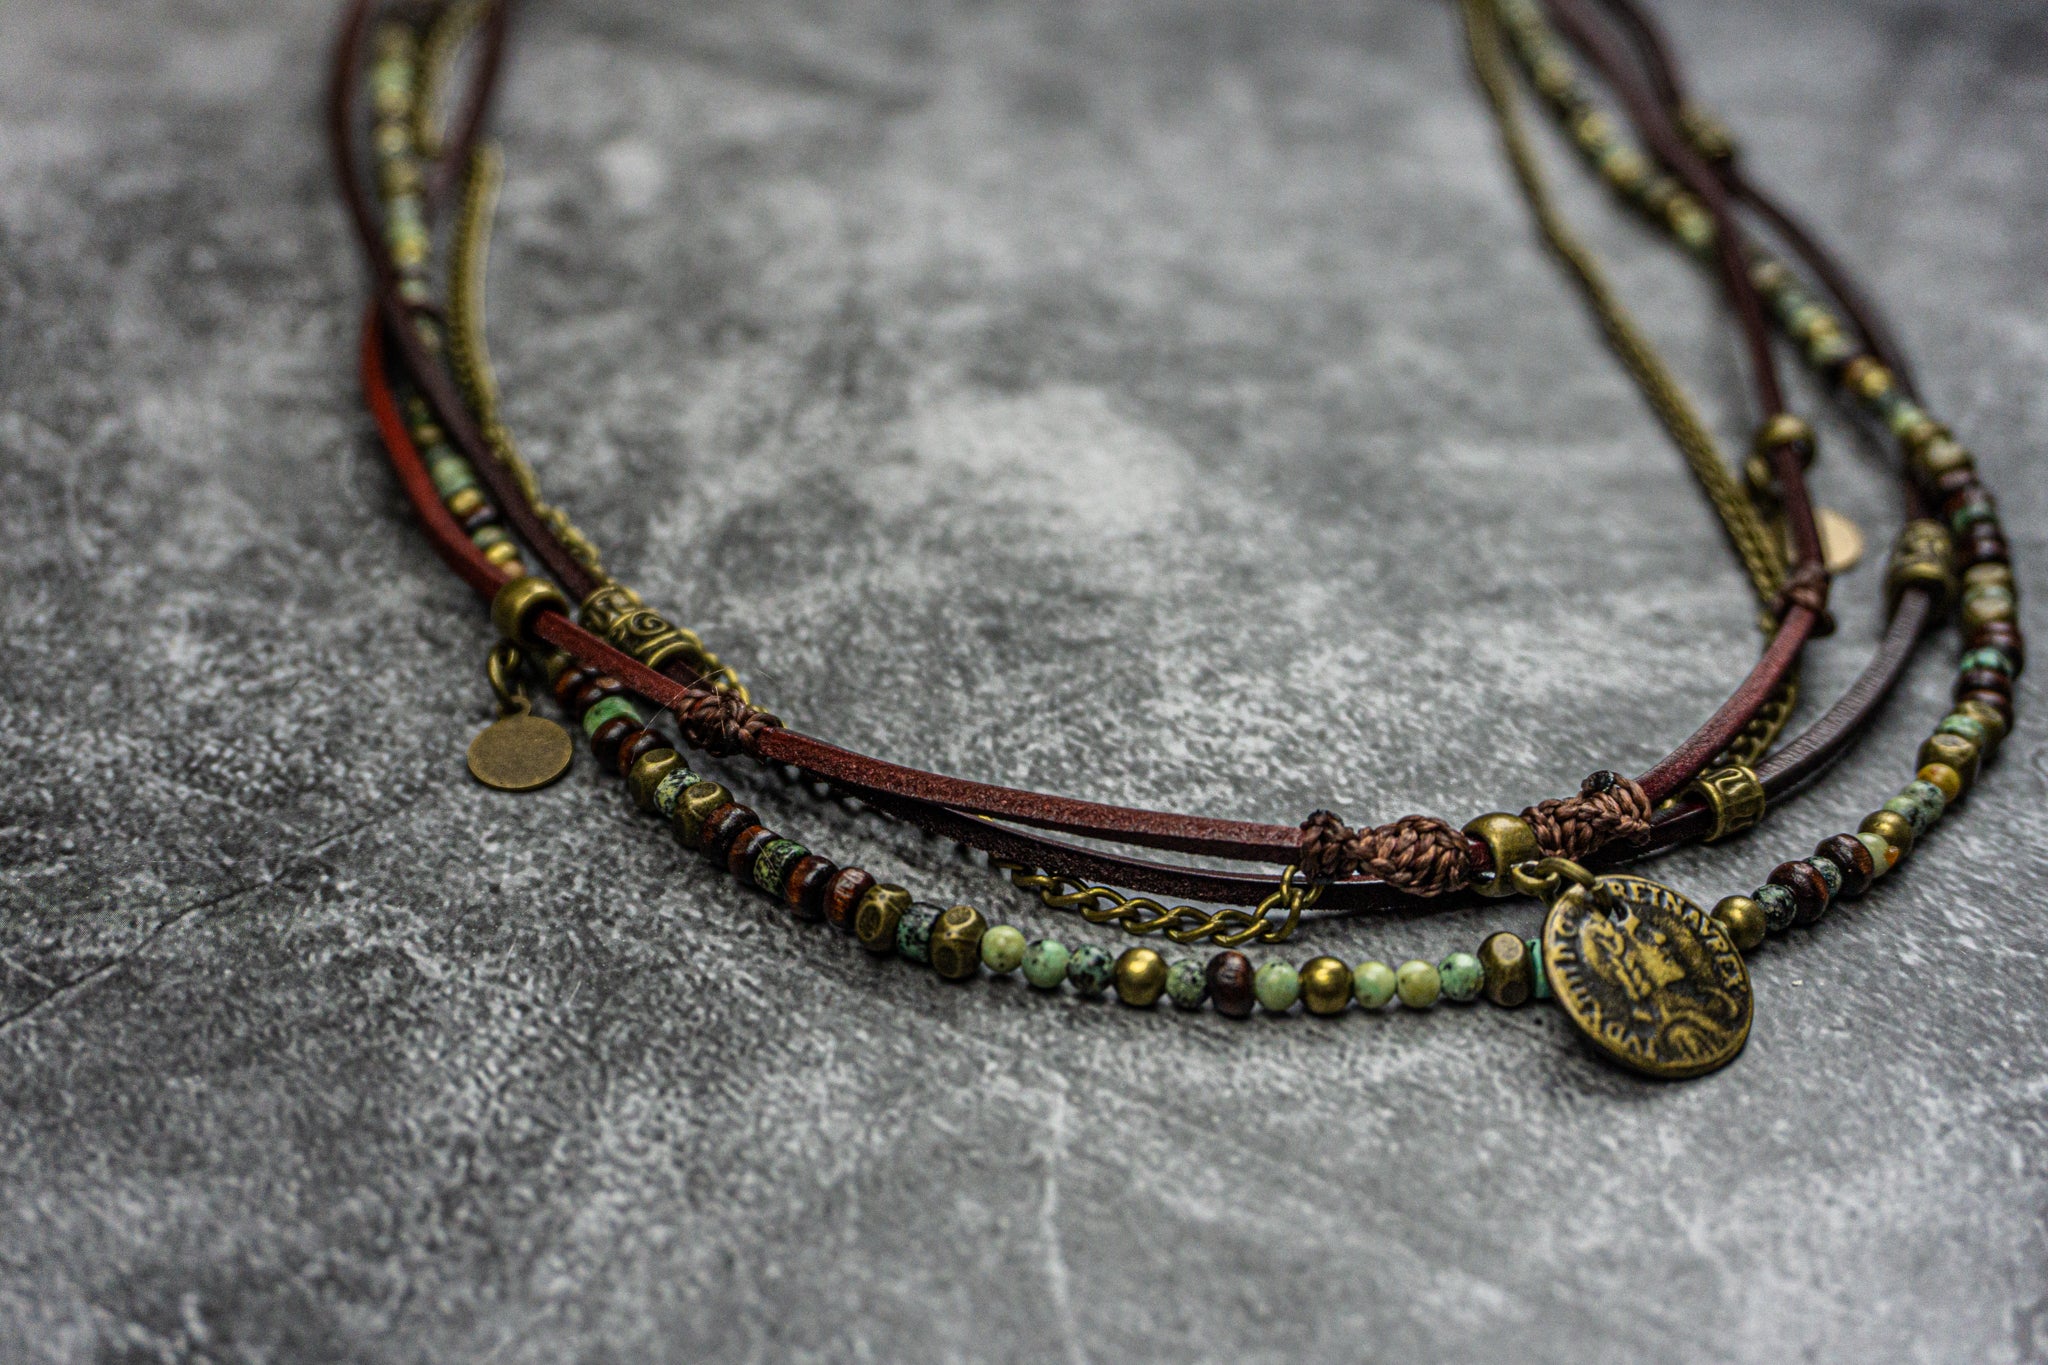  gemstone, wood, leather and chain charm necklace - wander jewellery